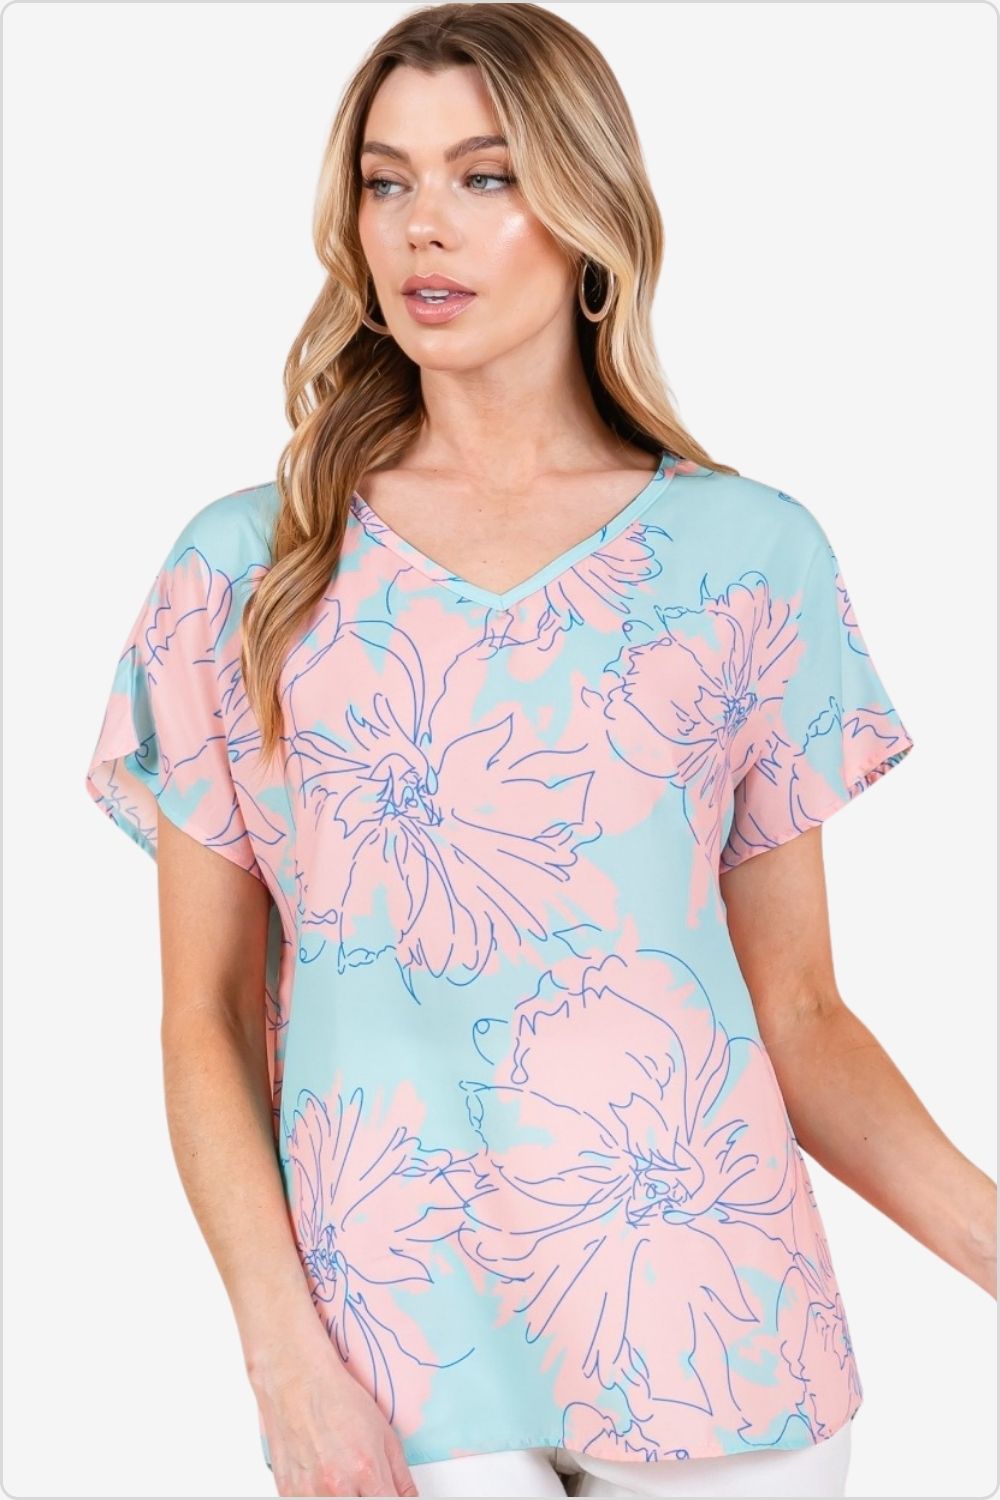 Bright floral print on a chic short sleeve t-shirt, perfect for summer styling, Color Aqua-Pink